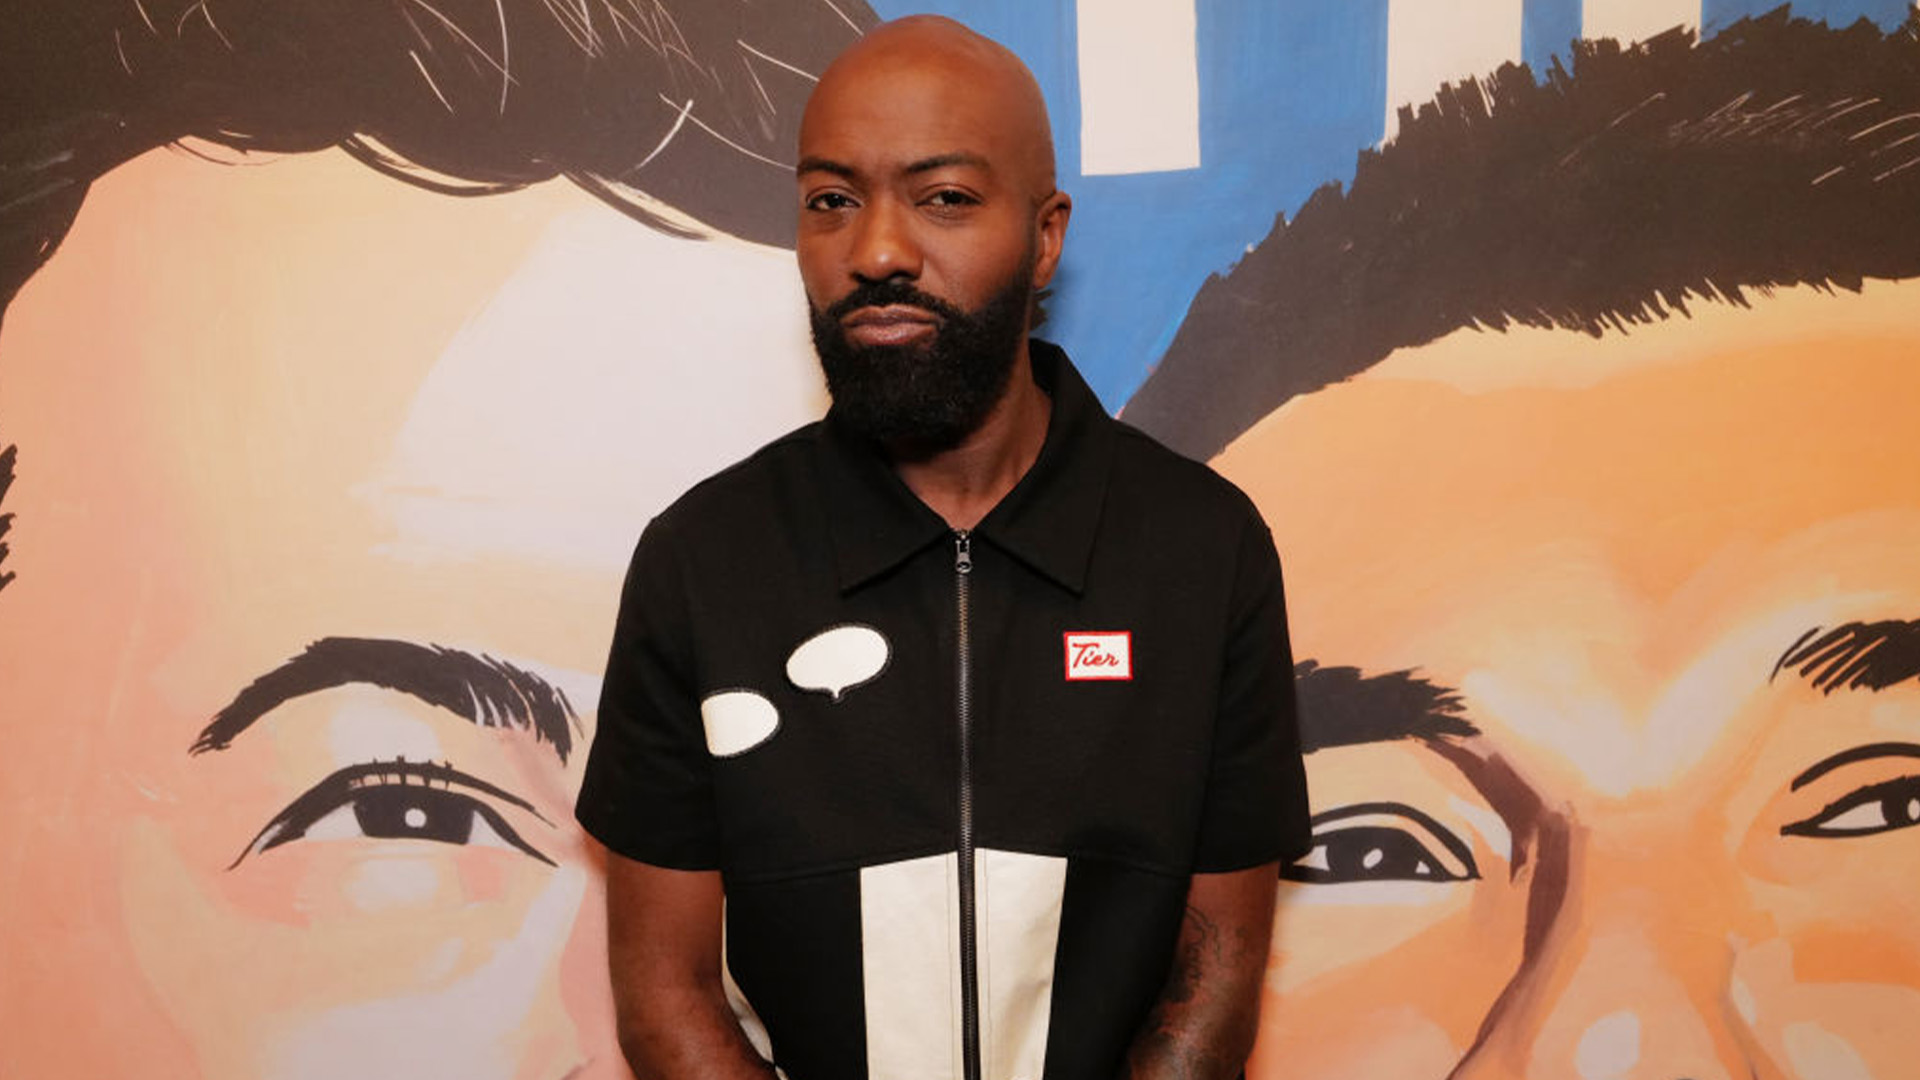 Comedian Desus Nice Says Having Brand Deals That Align With His Values Trumps Big Checks — 'That Should Never Be The Reason You Take A Deal'